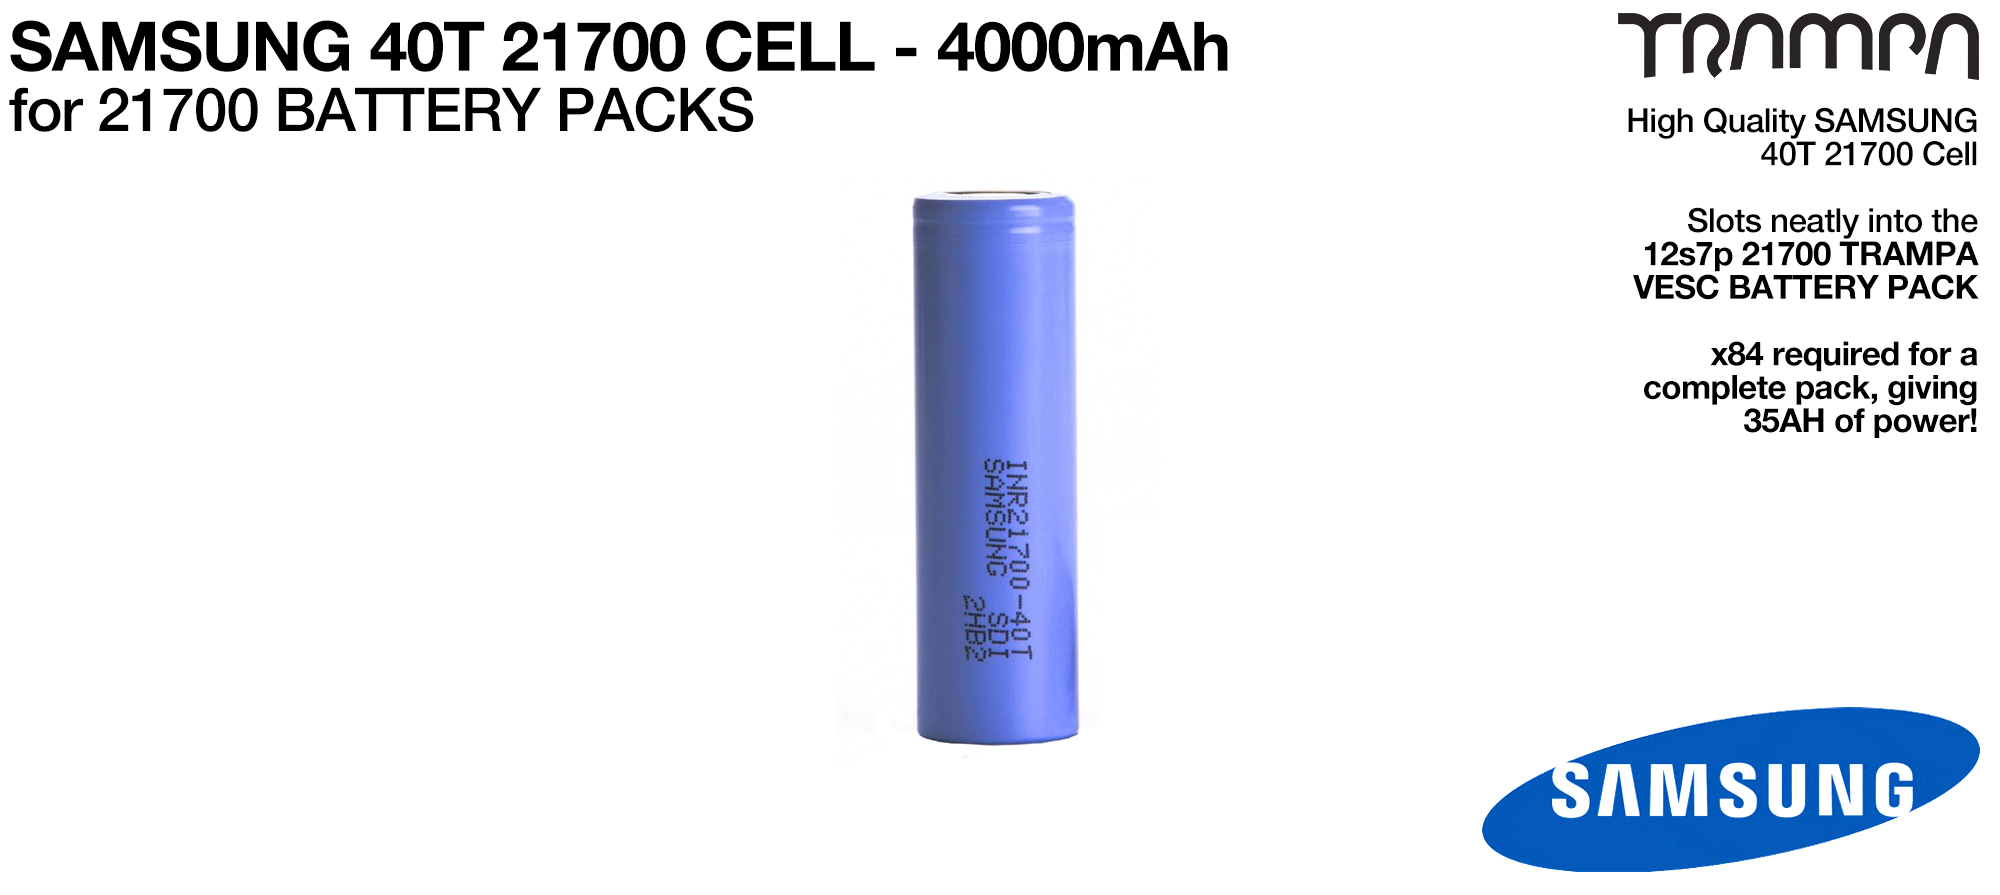 SAMSUNG 40T 21700 Batteries 4000mAh - UK CUSTOMERS ONLY